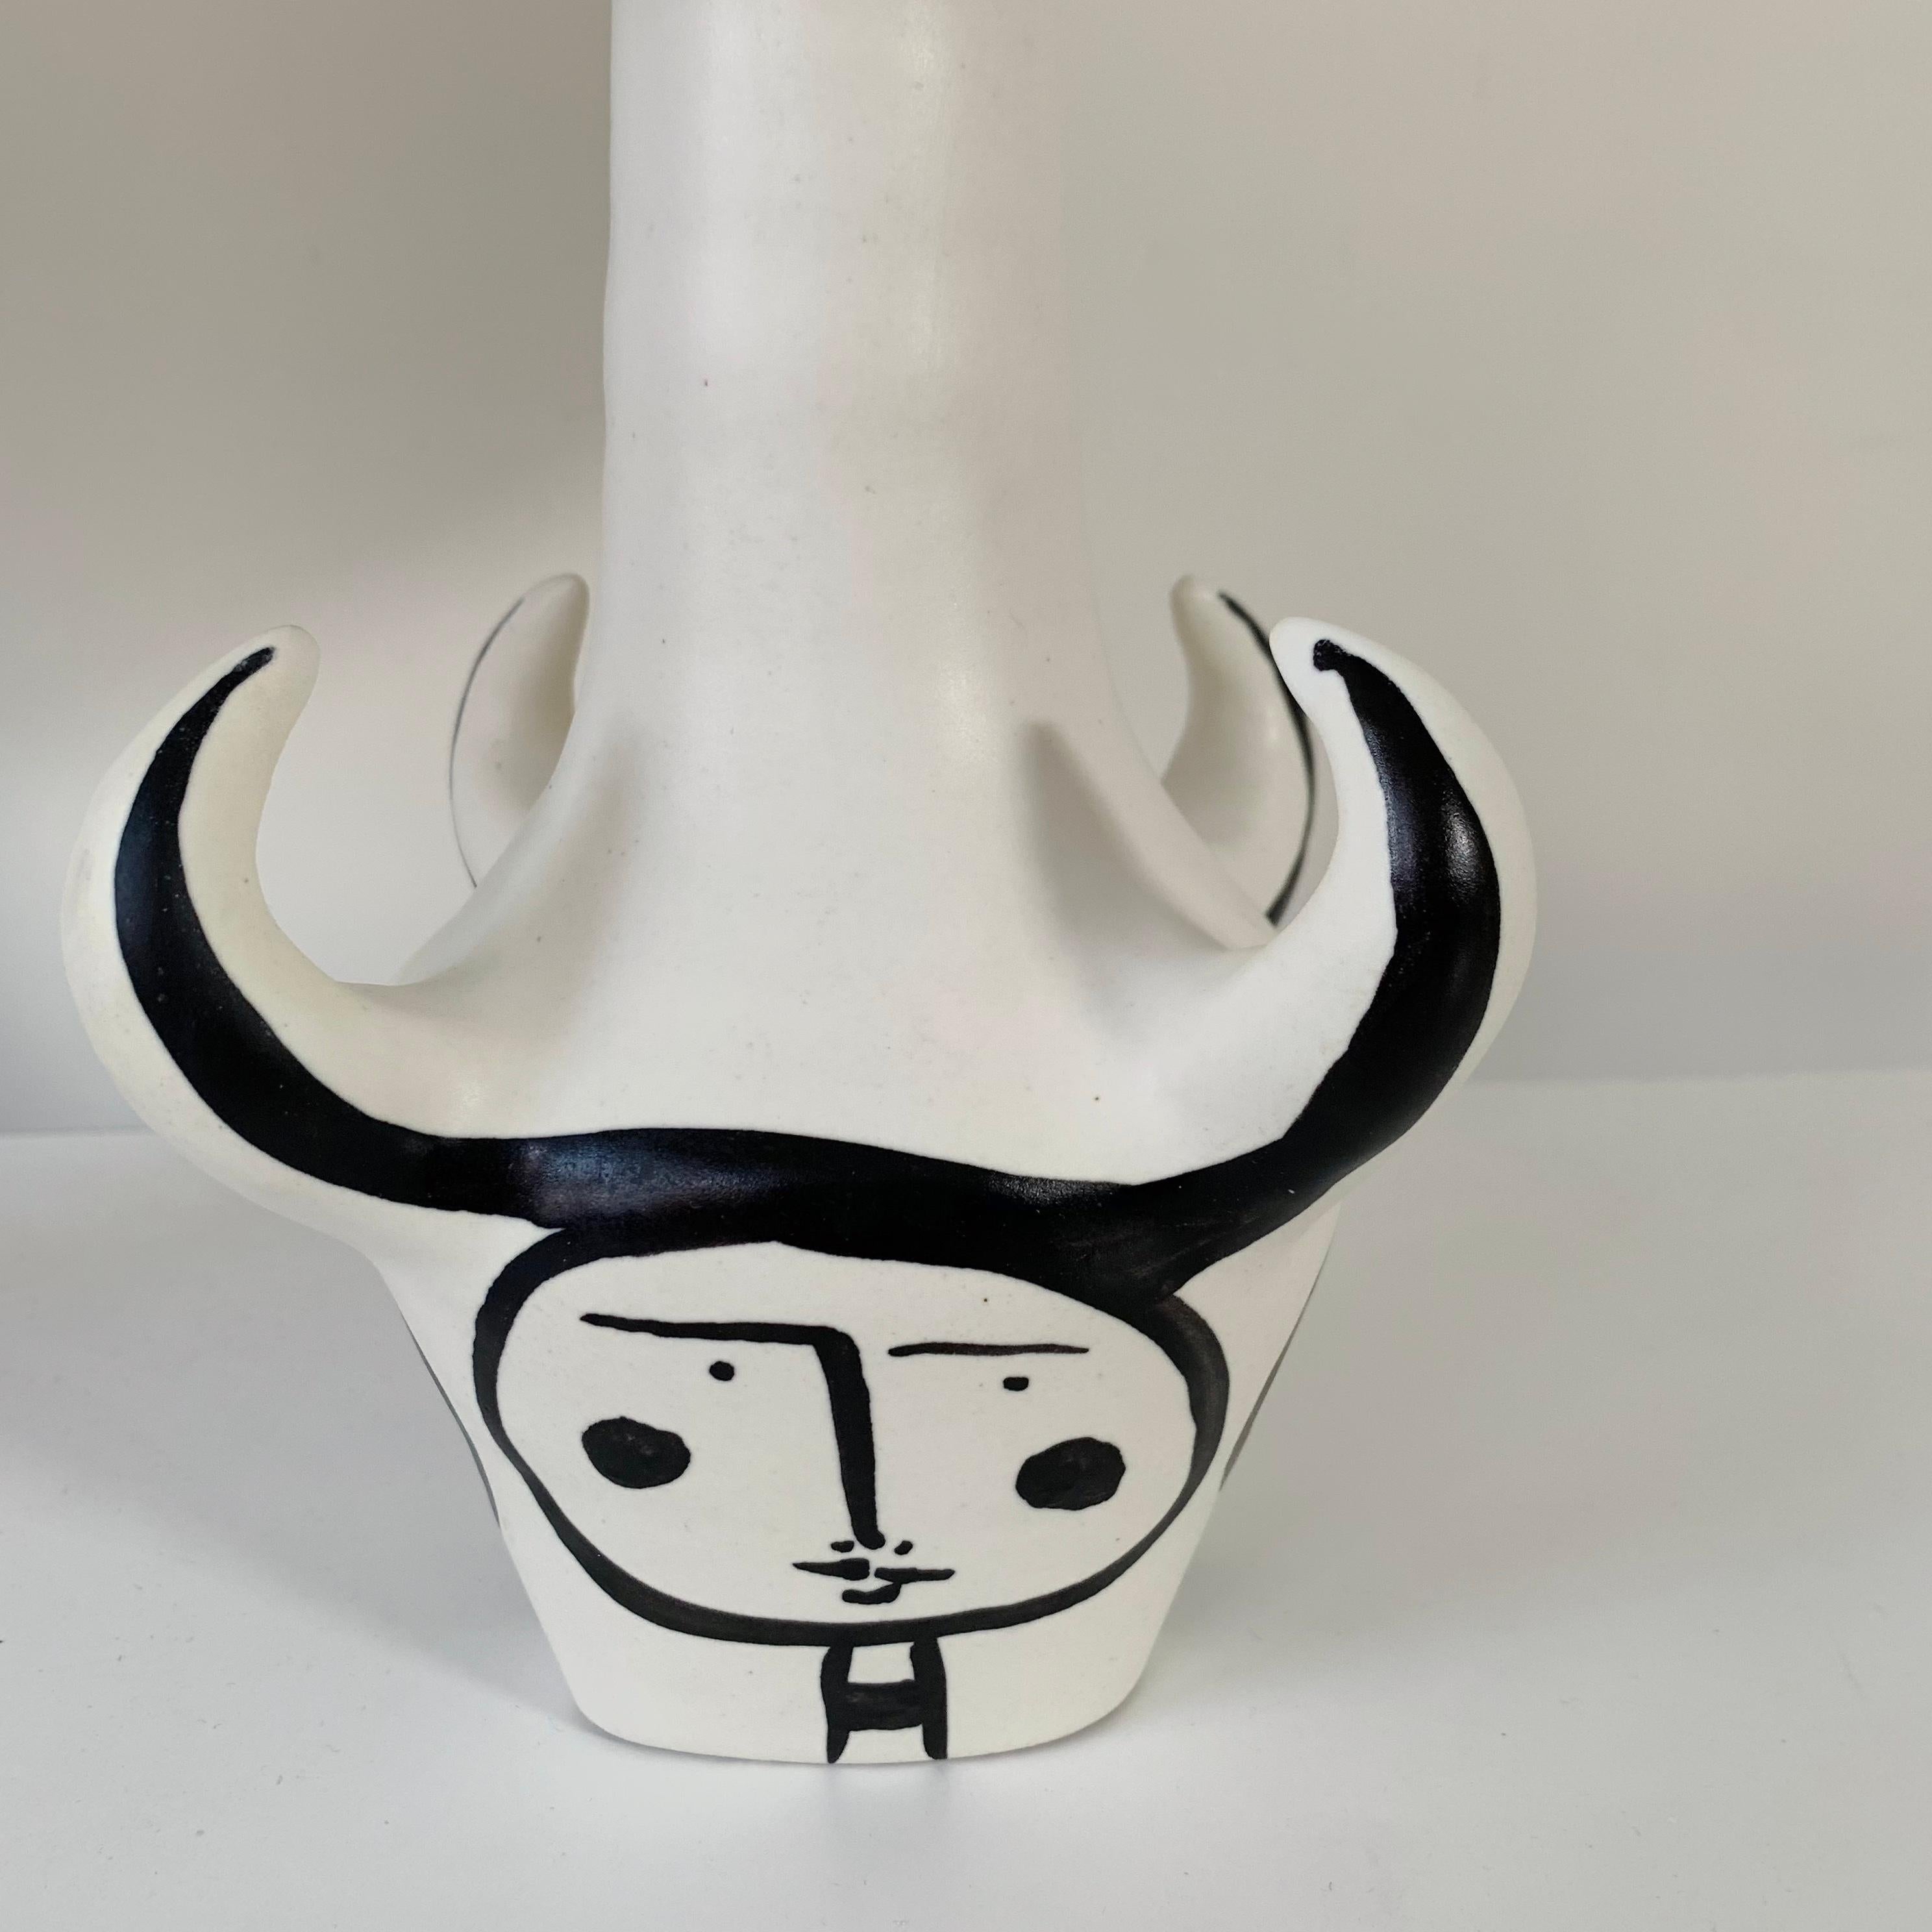  Roger Capron Pair Of 4 Horns Signed Ceramic Table Lamps , circa 1955, France. For Sale 2